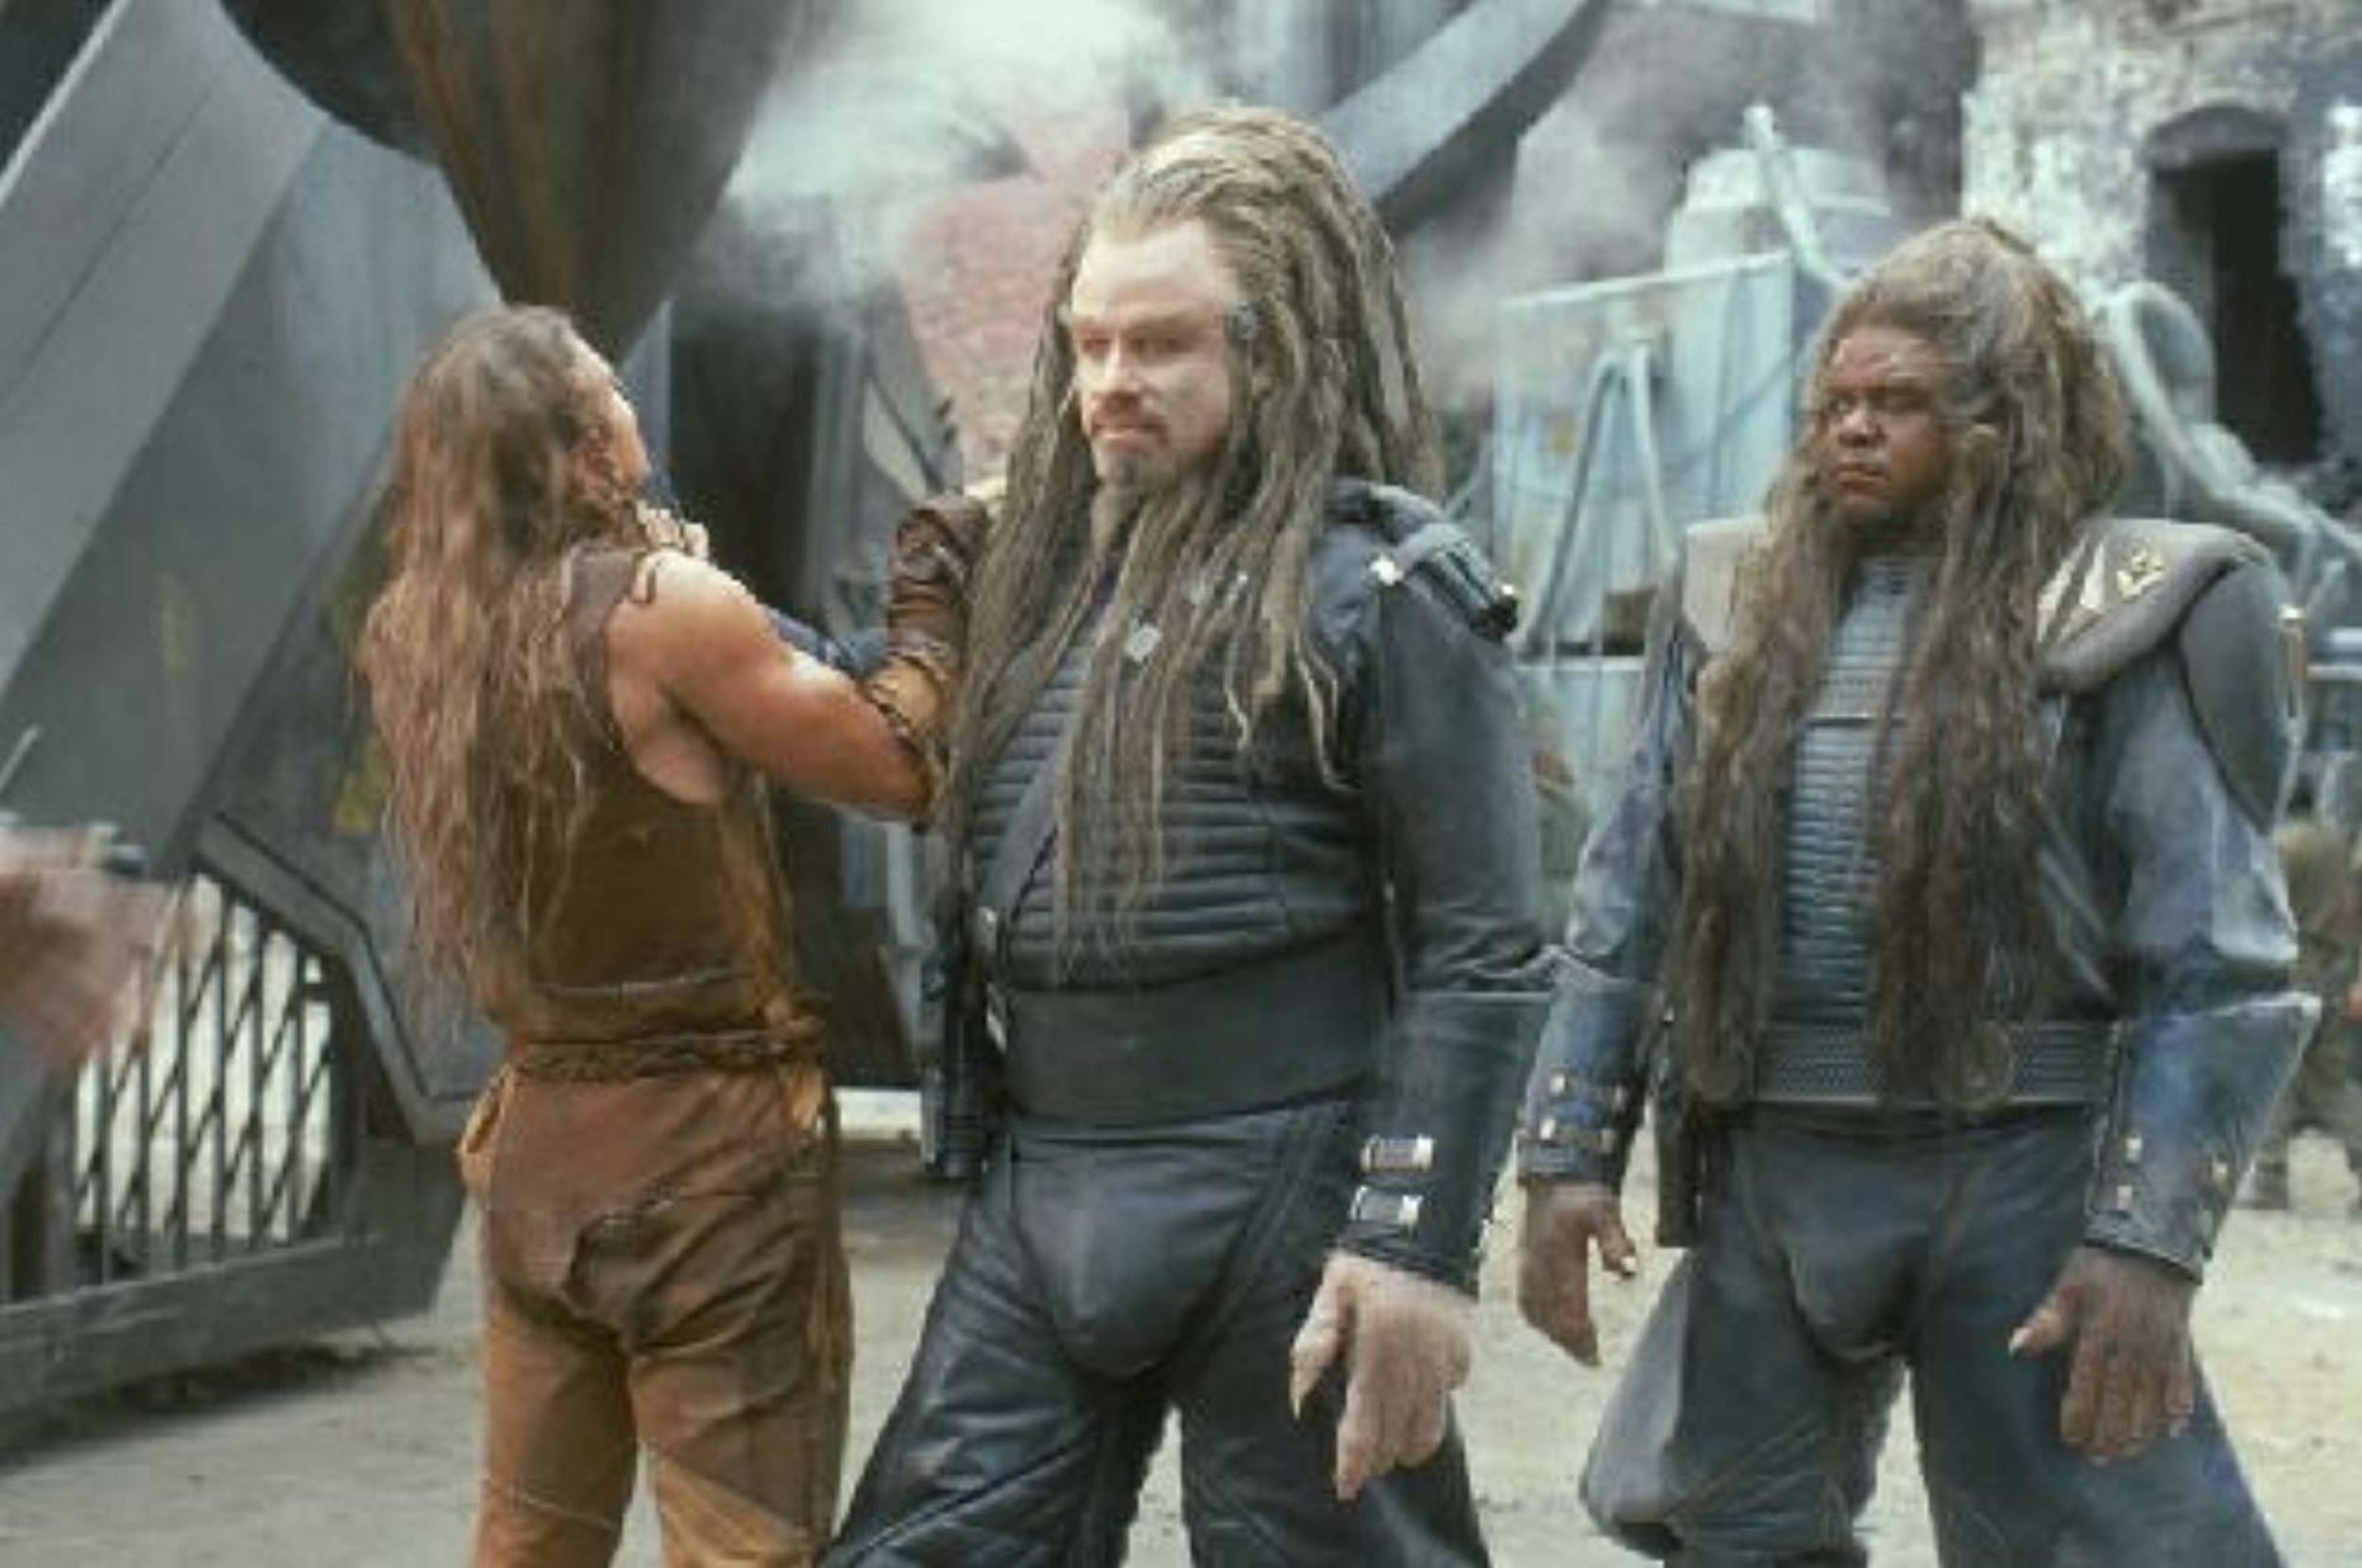 <p>OK, so maybe it isn’t accurate to call “Battlefield Earth” a popular book, unless you are talking about members of a certain organization. Still, it certainly sold its copies, regardless of quality. Plus, we had to talk about this movie, given that it is one of the biggest flops ever. In addition to failing at the box office, “Battlefield Earth” is considered one of the absolute worst films in the history of the medium.</p><p><a href='https://www.msn.com/en-us/community/channel/vid-cj9pqbr0vn9in2b6ddcd8sfgpfq6x6utp44fssrv6mc2gtybw0us'>Follow us on MSN to see more of our exclusive entertainment content.</a></p>